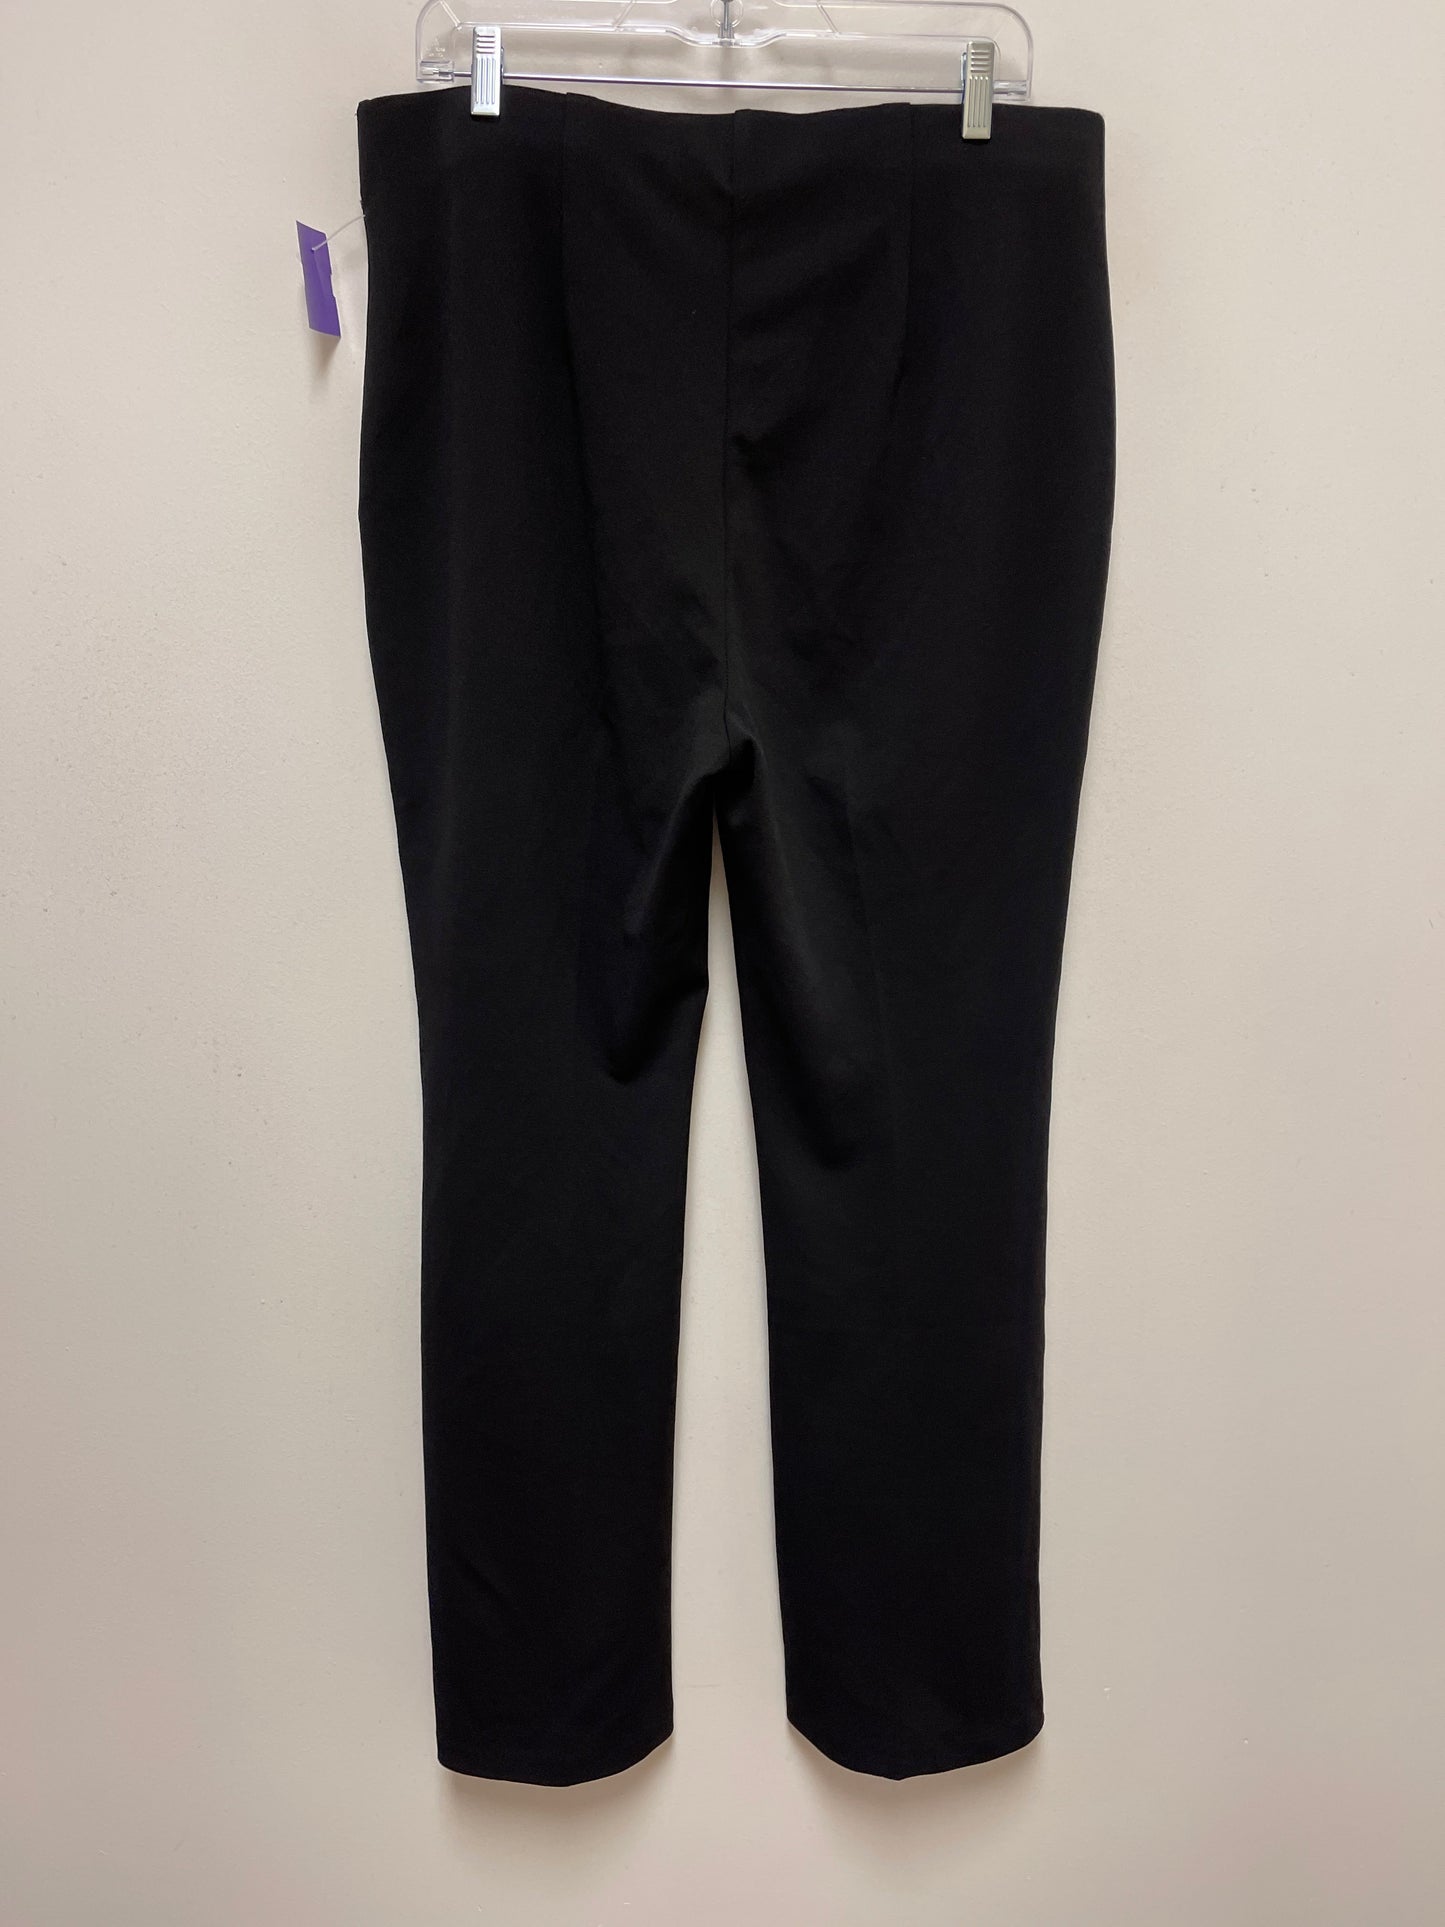 Black Pants Dress New York And Co, Size 14